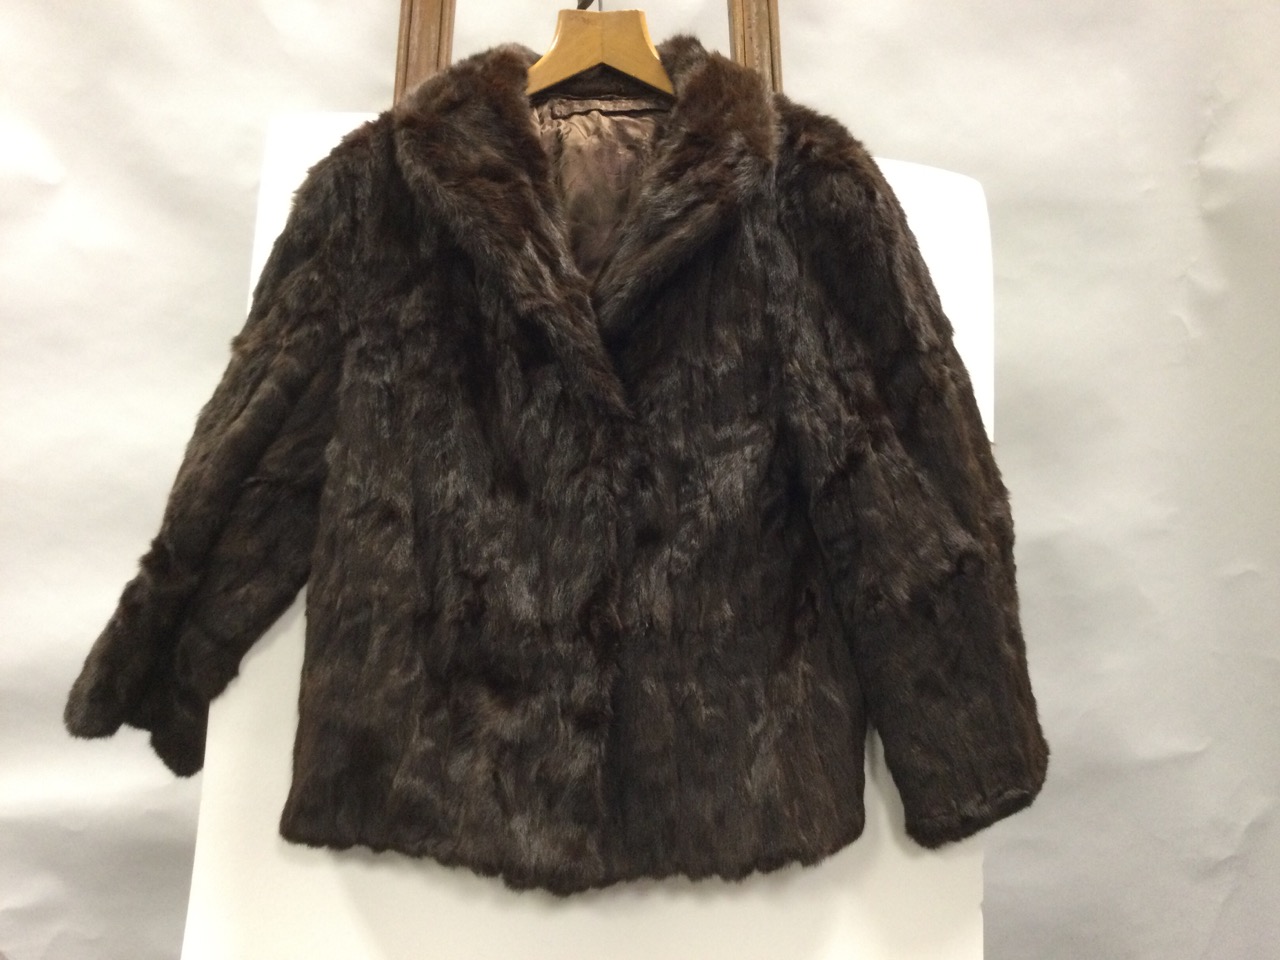 A lined mink fur coat with hook and eye fastenings, pockets, wide collar - size 12/14; and a fox fur - Image 2 of 3